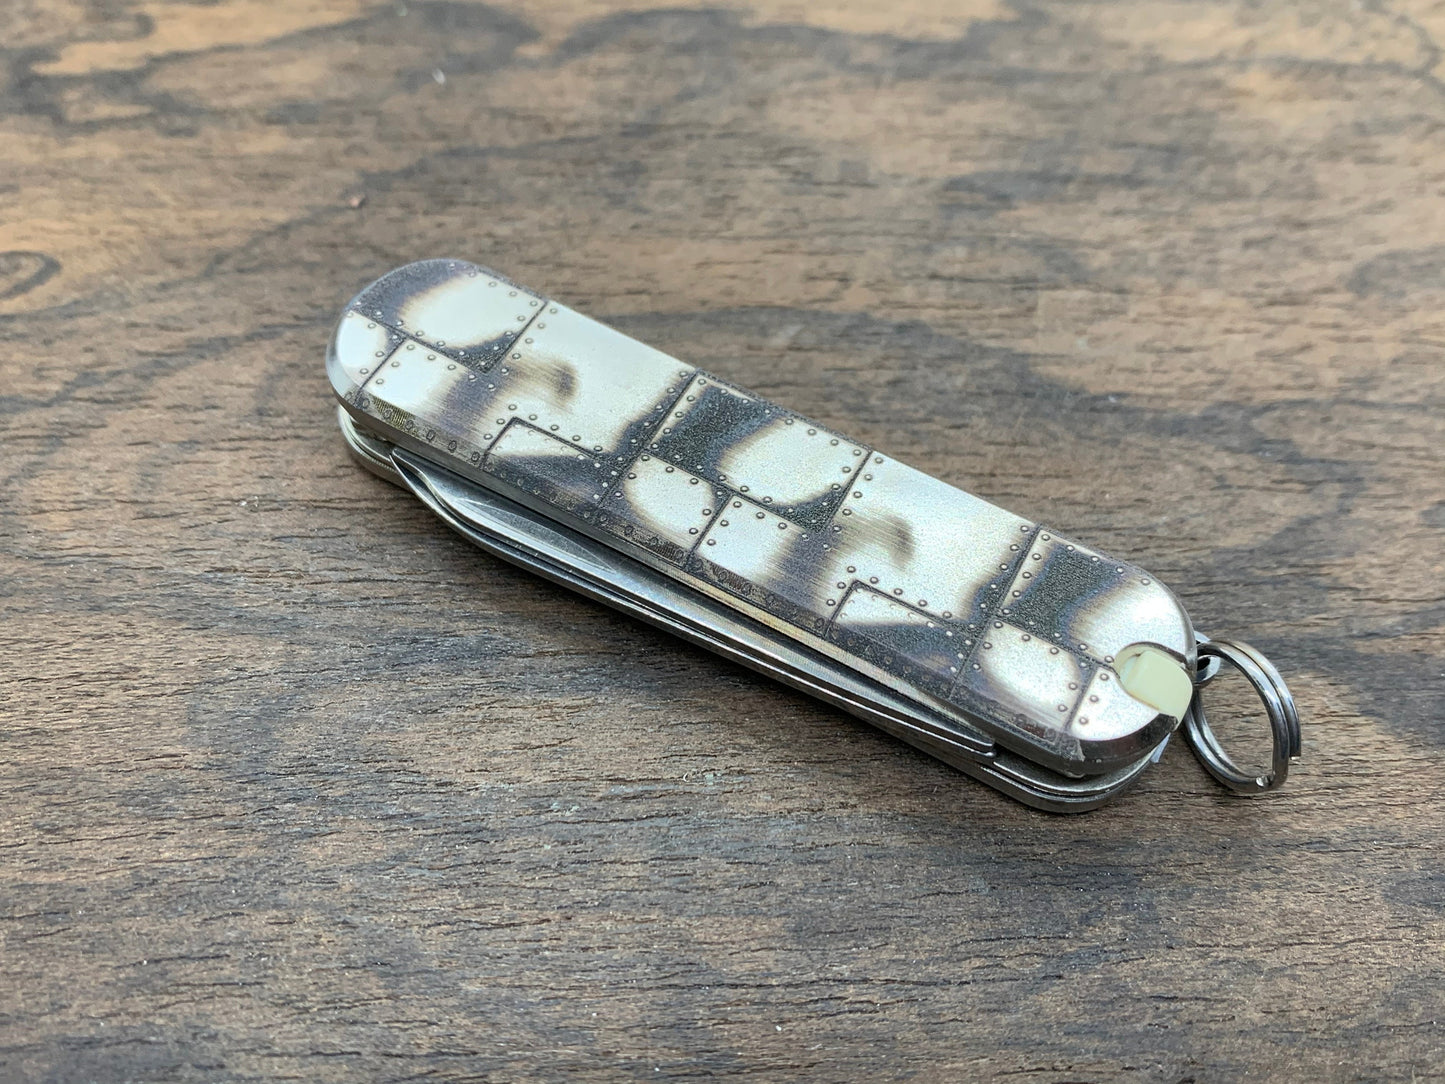 RIVETED AIRPLANE 58mm Titanium Scales for Swiss Army SAK